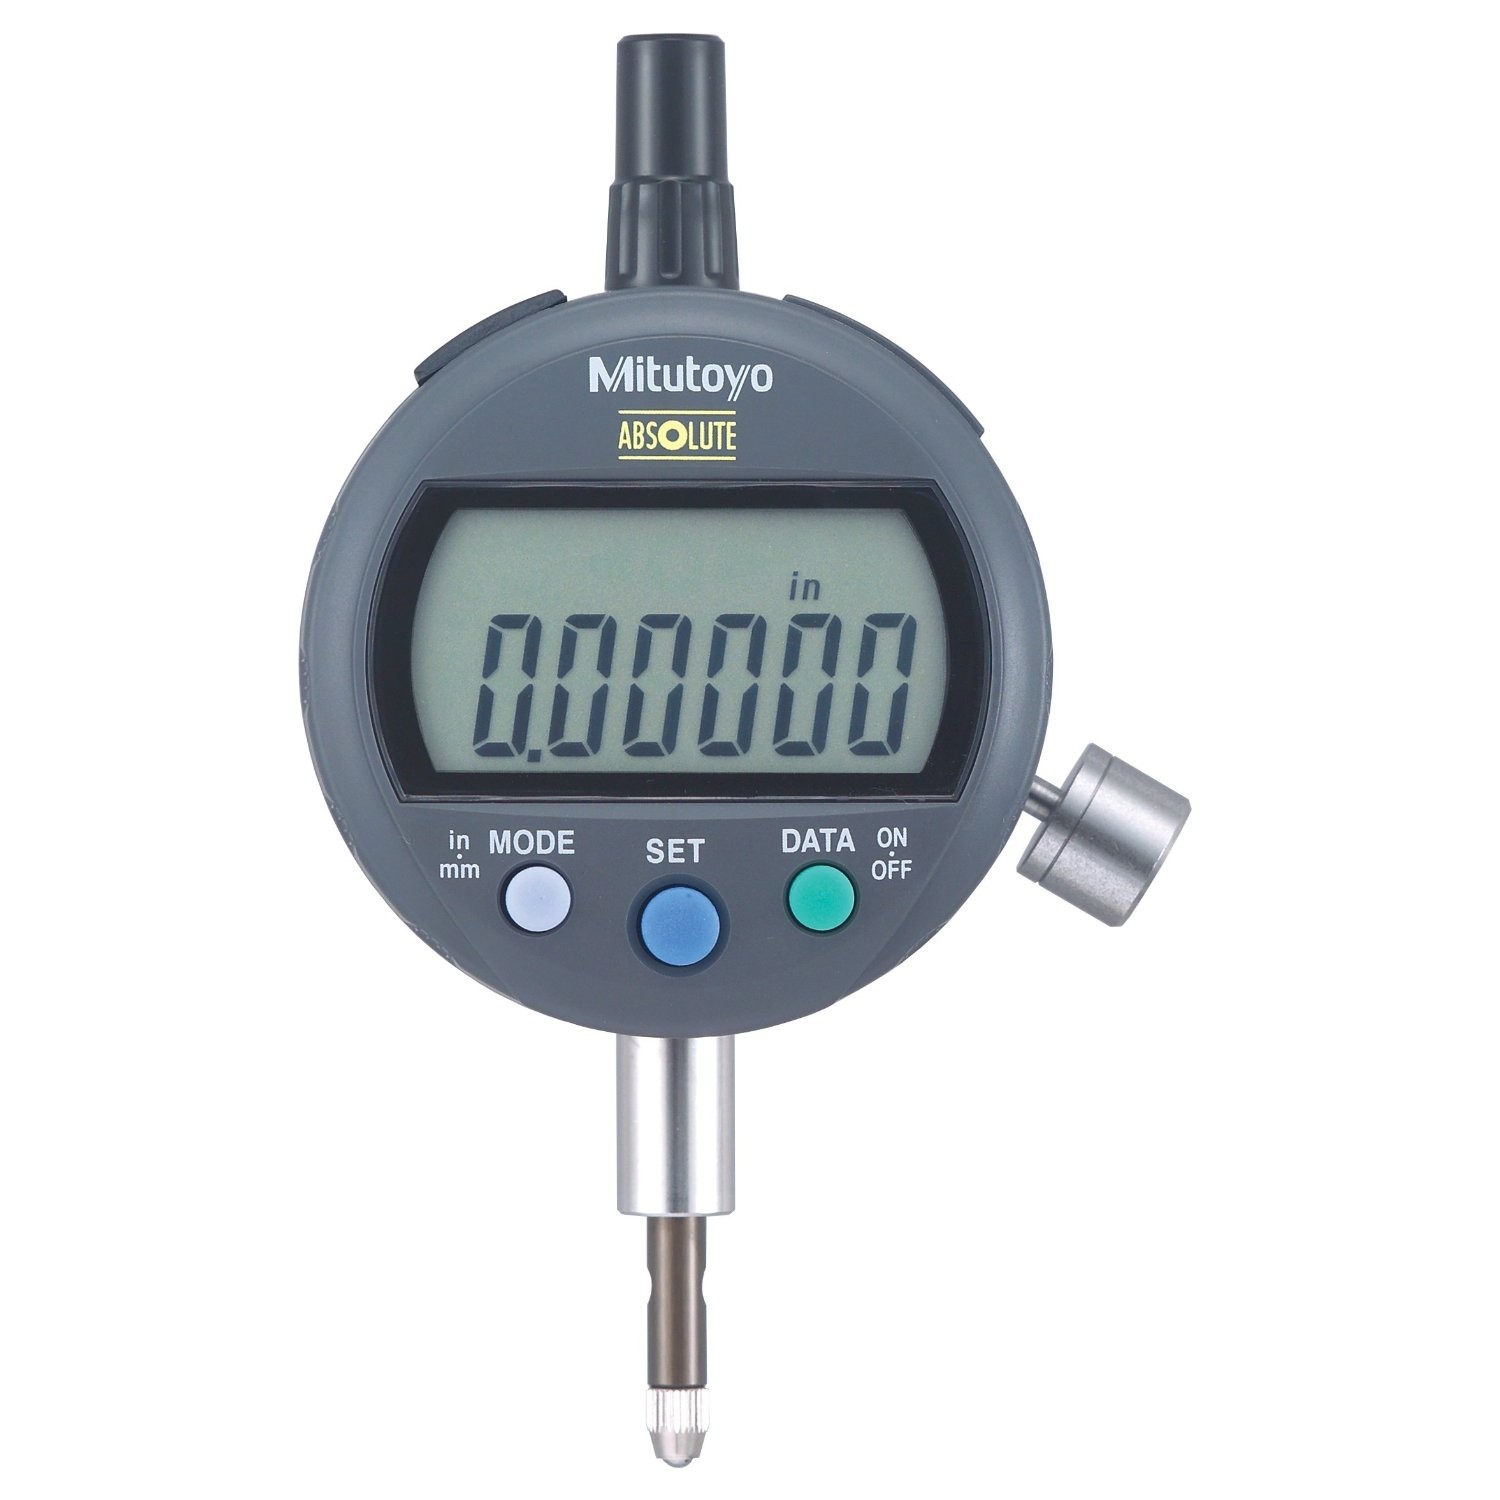 Mitutoyo 543-396B ABSOLUTE Digimatic Indicator with SPC output, ID-C 